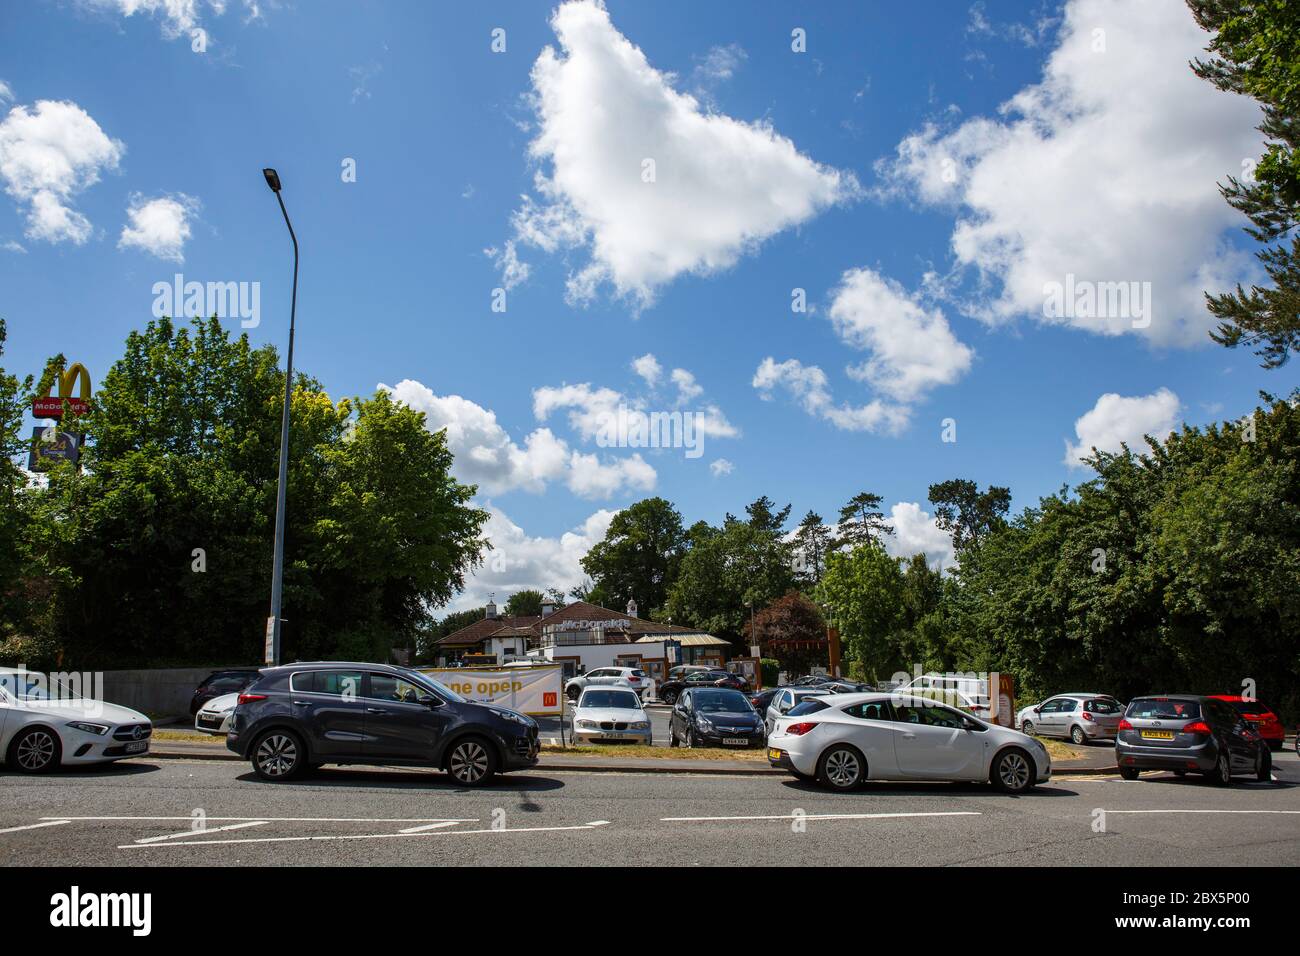 Carmarthen, UK. 5 June, 2020. Cars queuing at McDonald's in Carmarthen for its drive-through service. Credit: Gruffydd Ll. Thomas/Alamy Live News Stock Photo